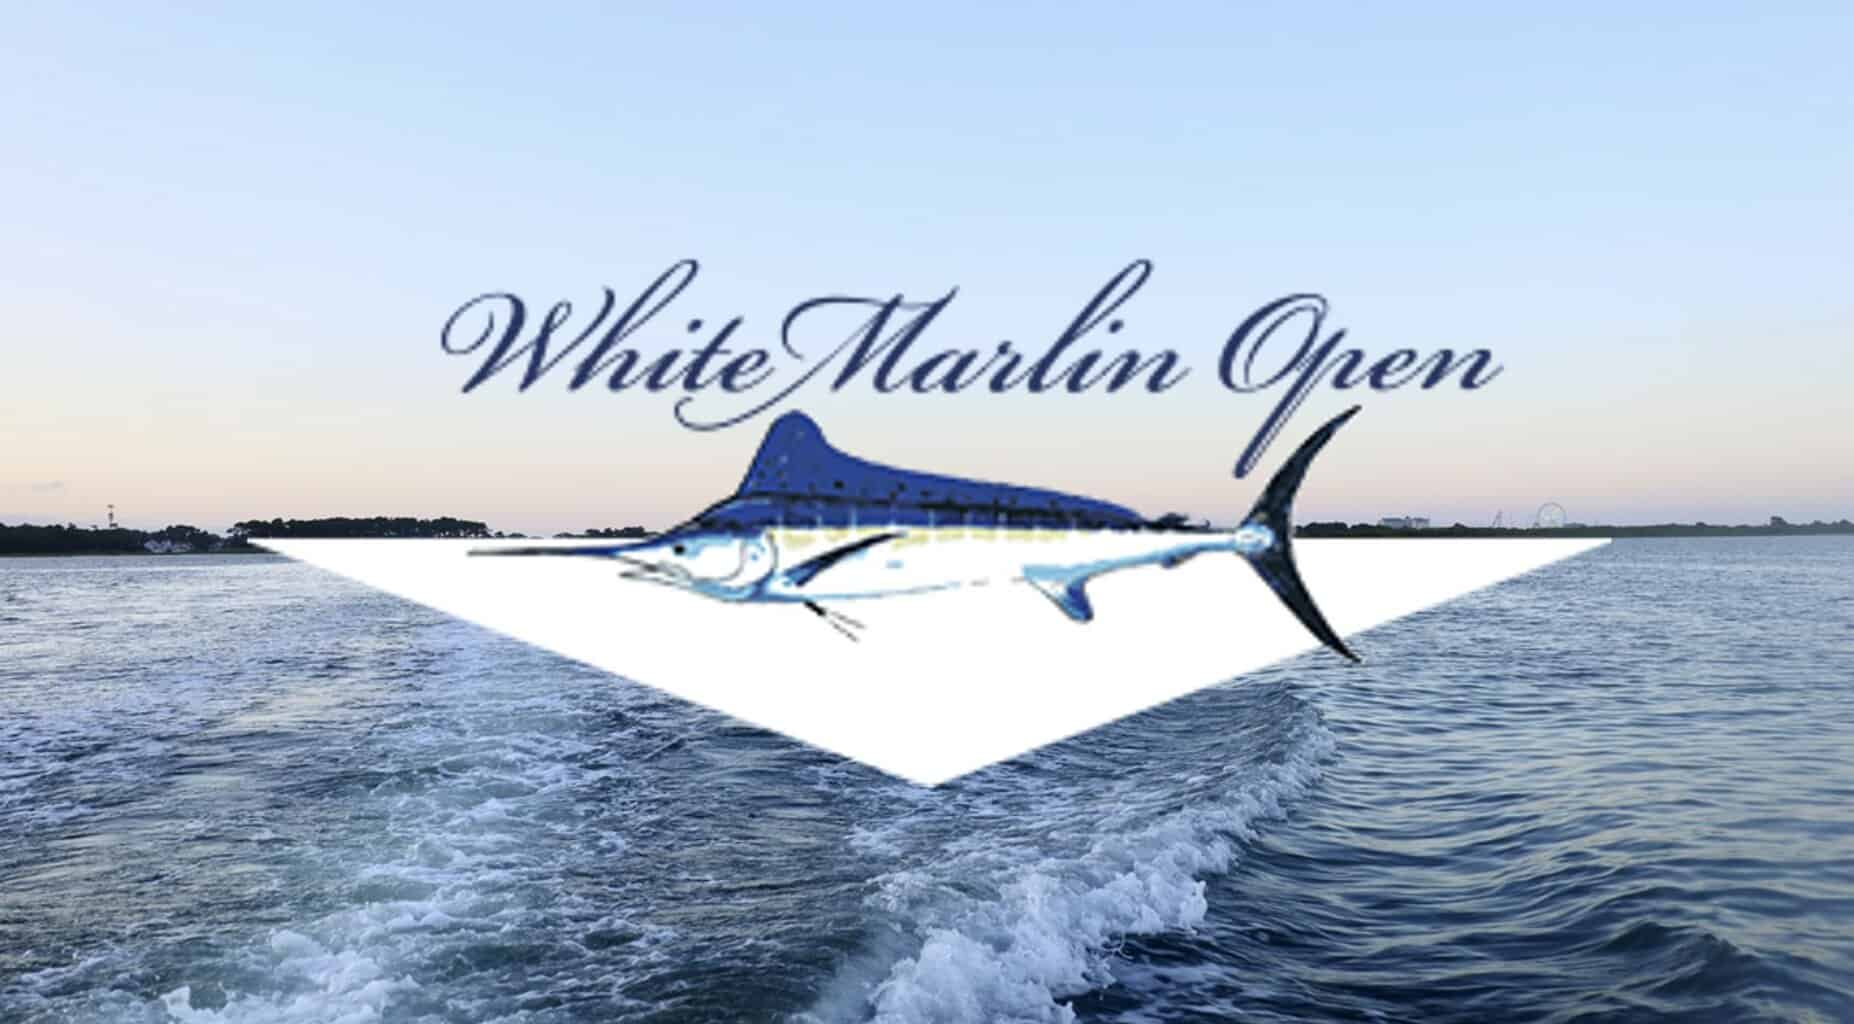 Guide to the 2022 White Marlin Open